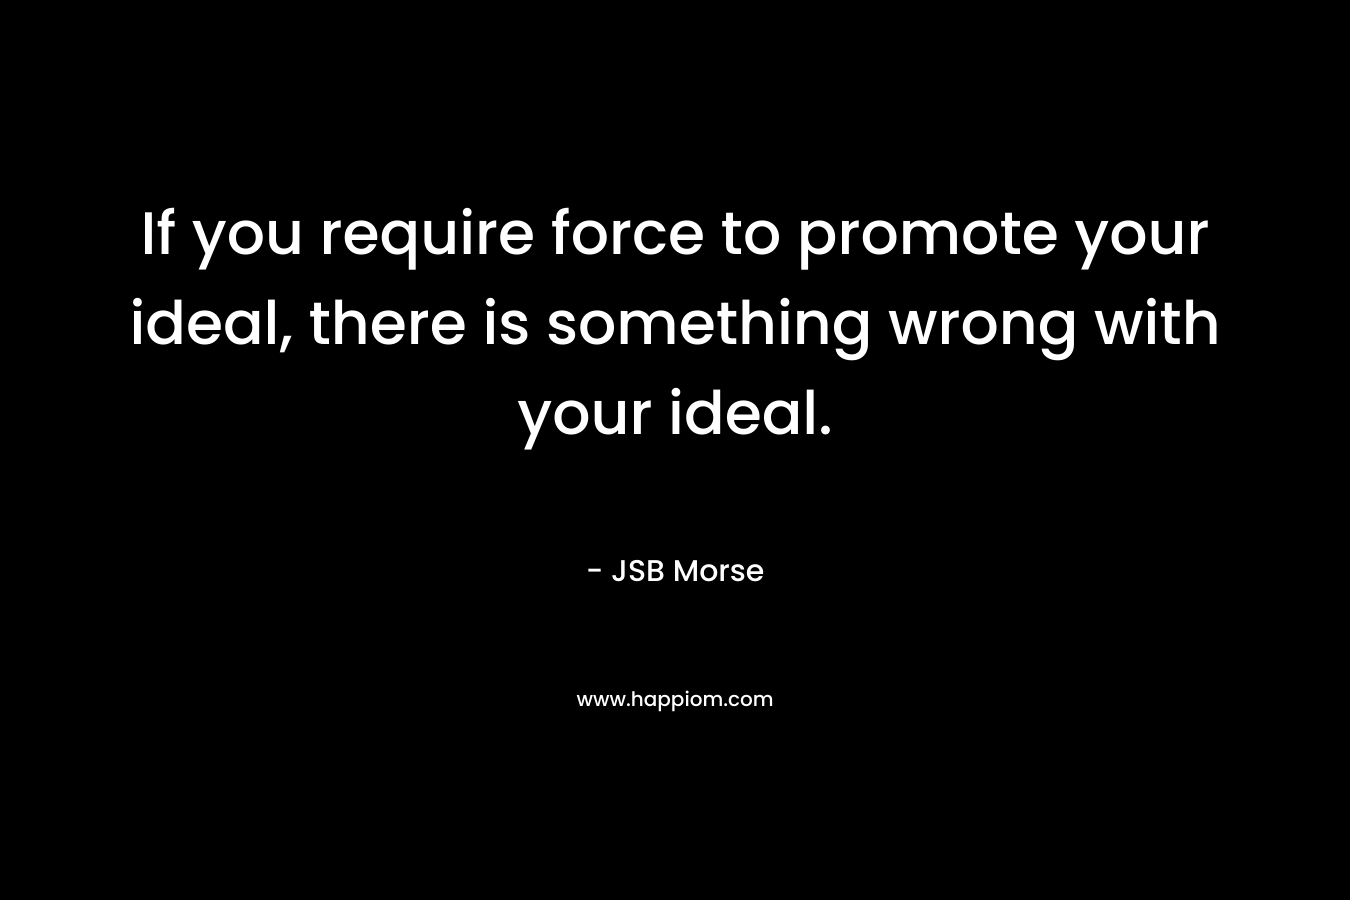 If you require force to promote your ideal, there is something wrong with your ideal. – JSB Morse